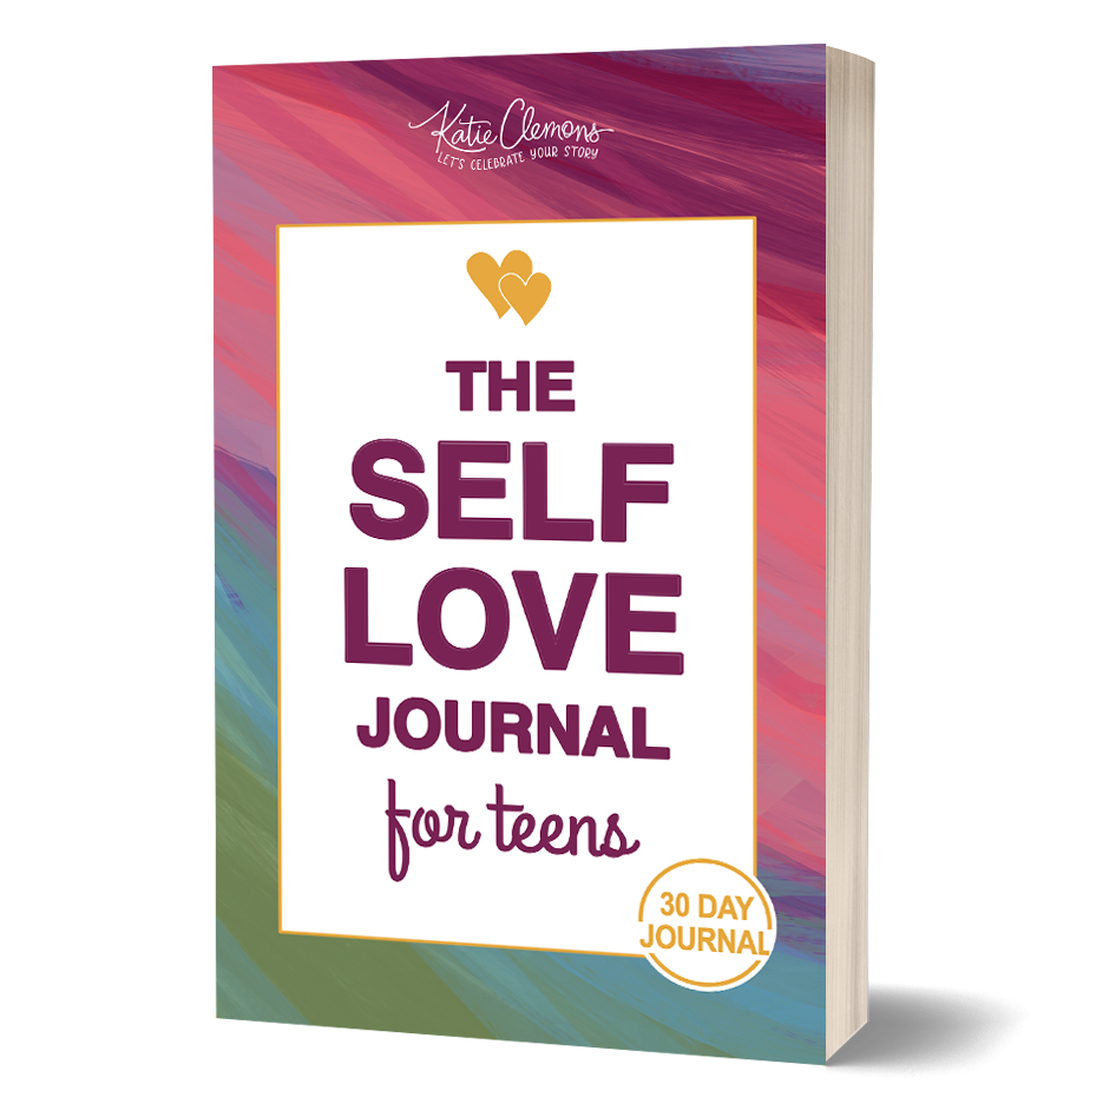 Self-love Journal For Women - (self-love Workbook And Journal) By